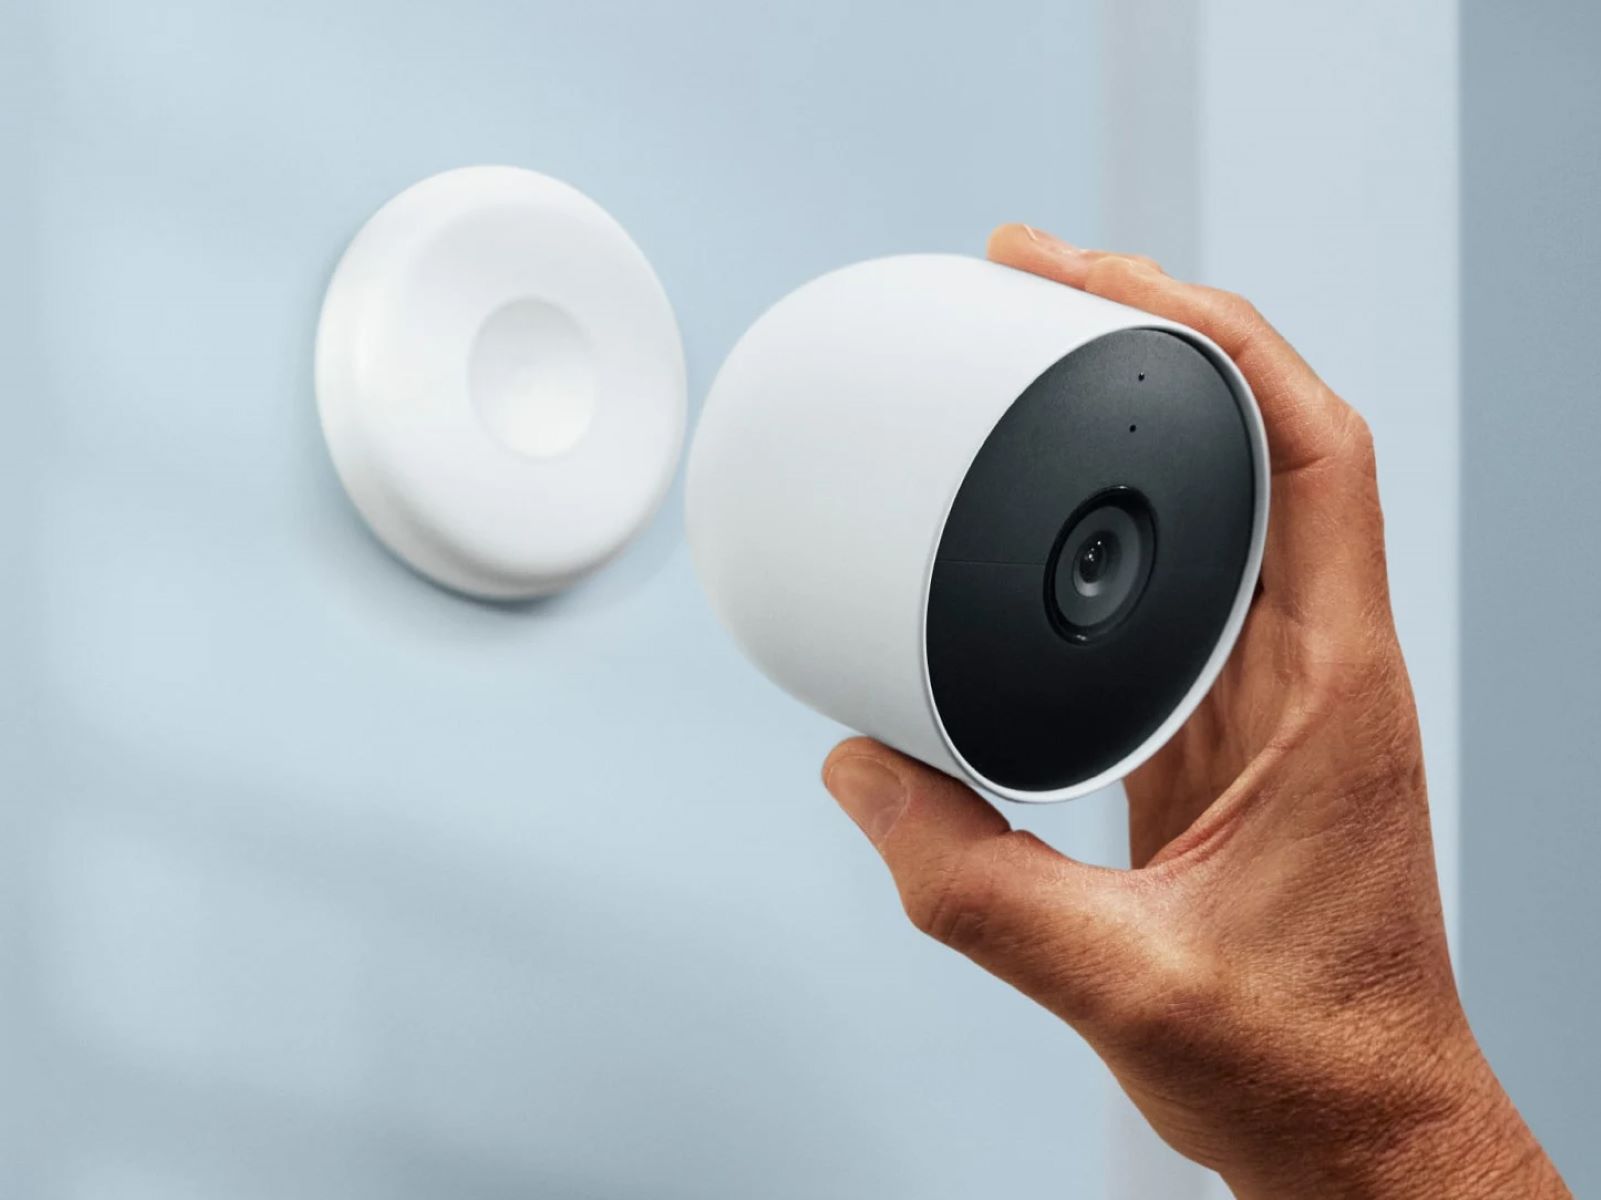 When Will Nest Come Out With A New Outdoor Camera?